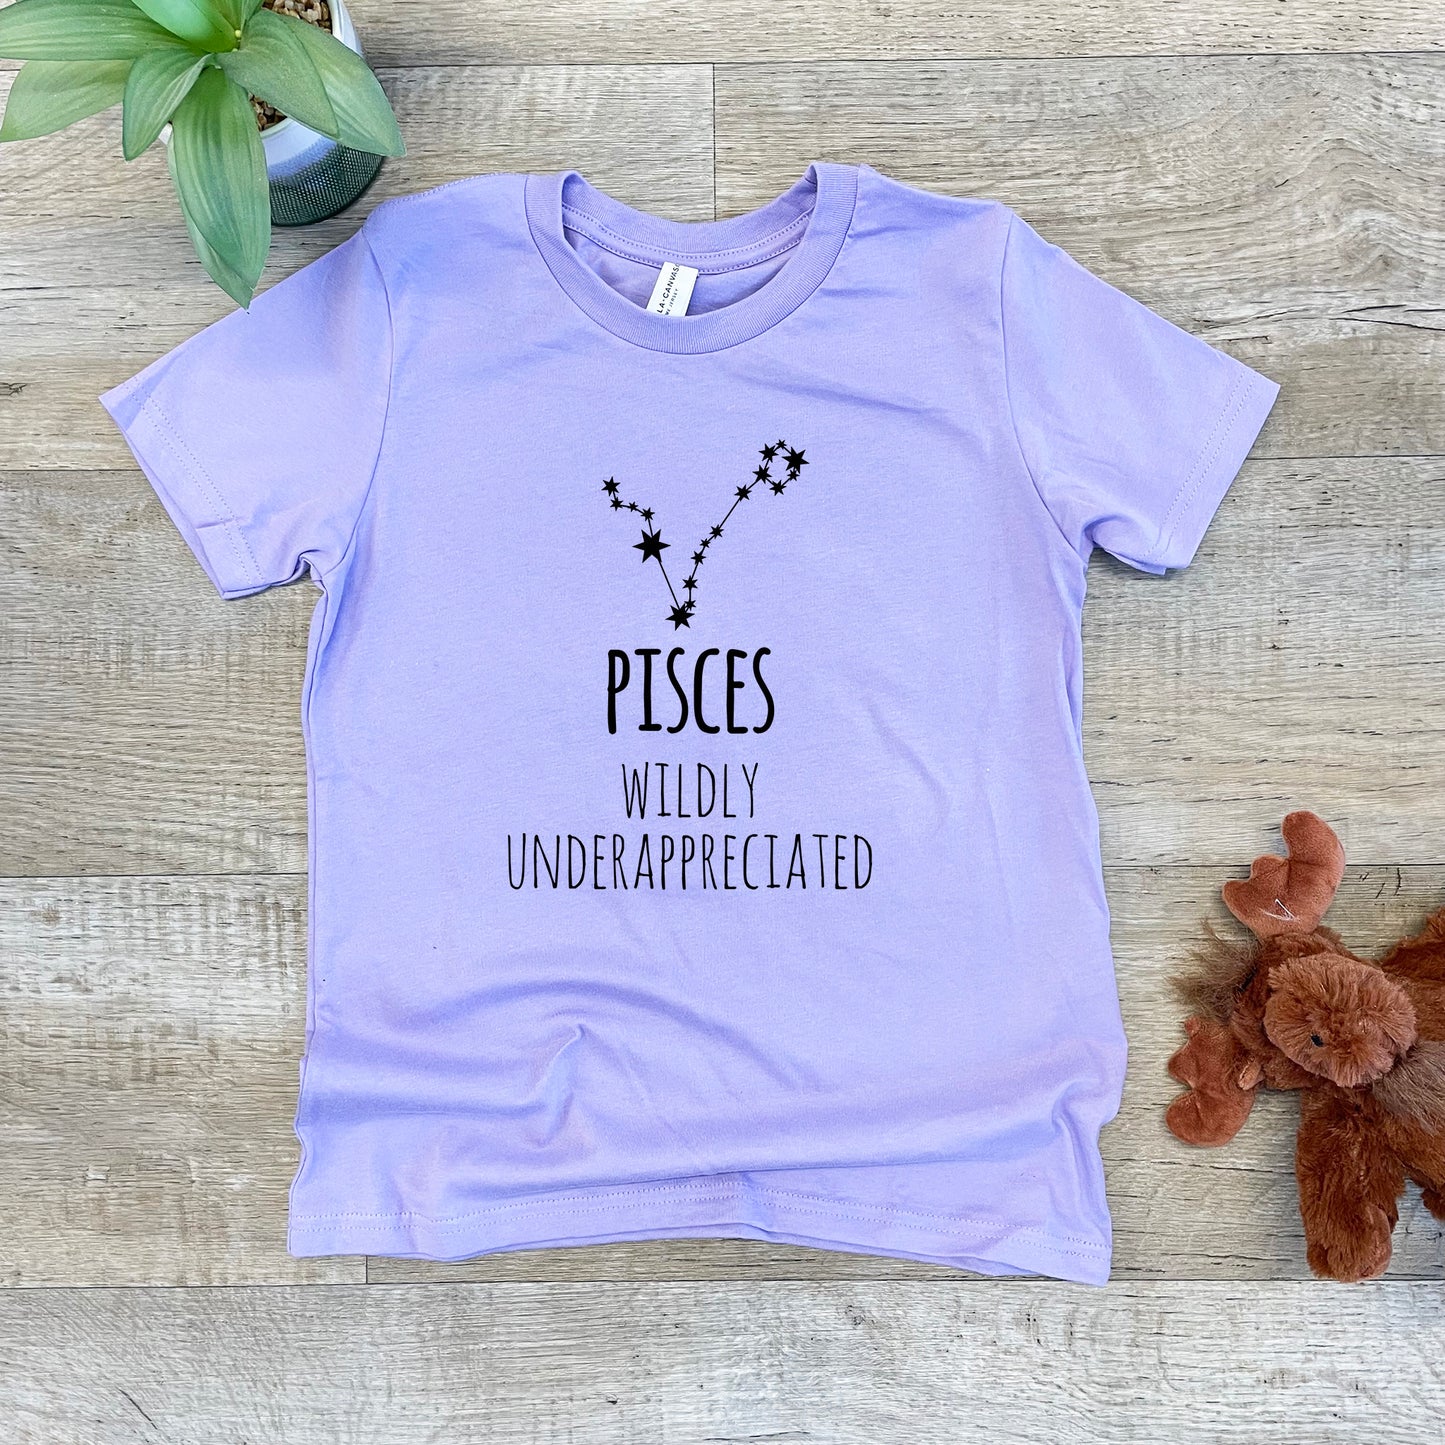 Pisces (Wildly Underappreciated) - Kid's Tee - Columbia Blue or Lavender